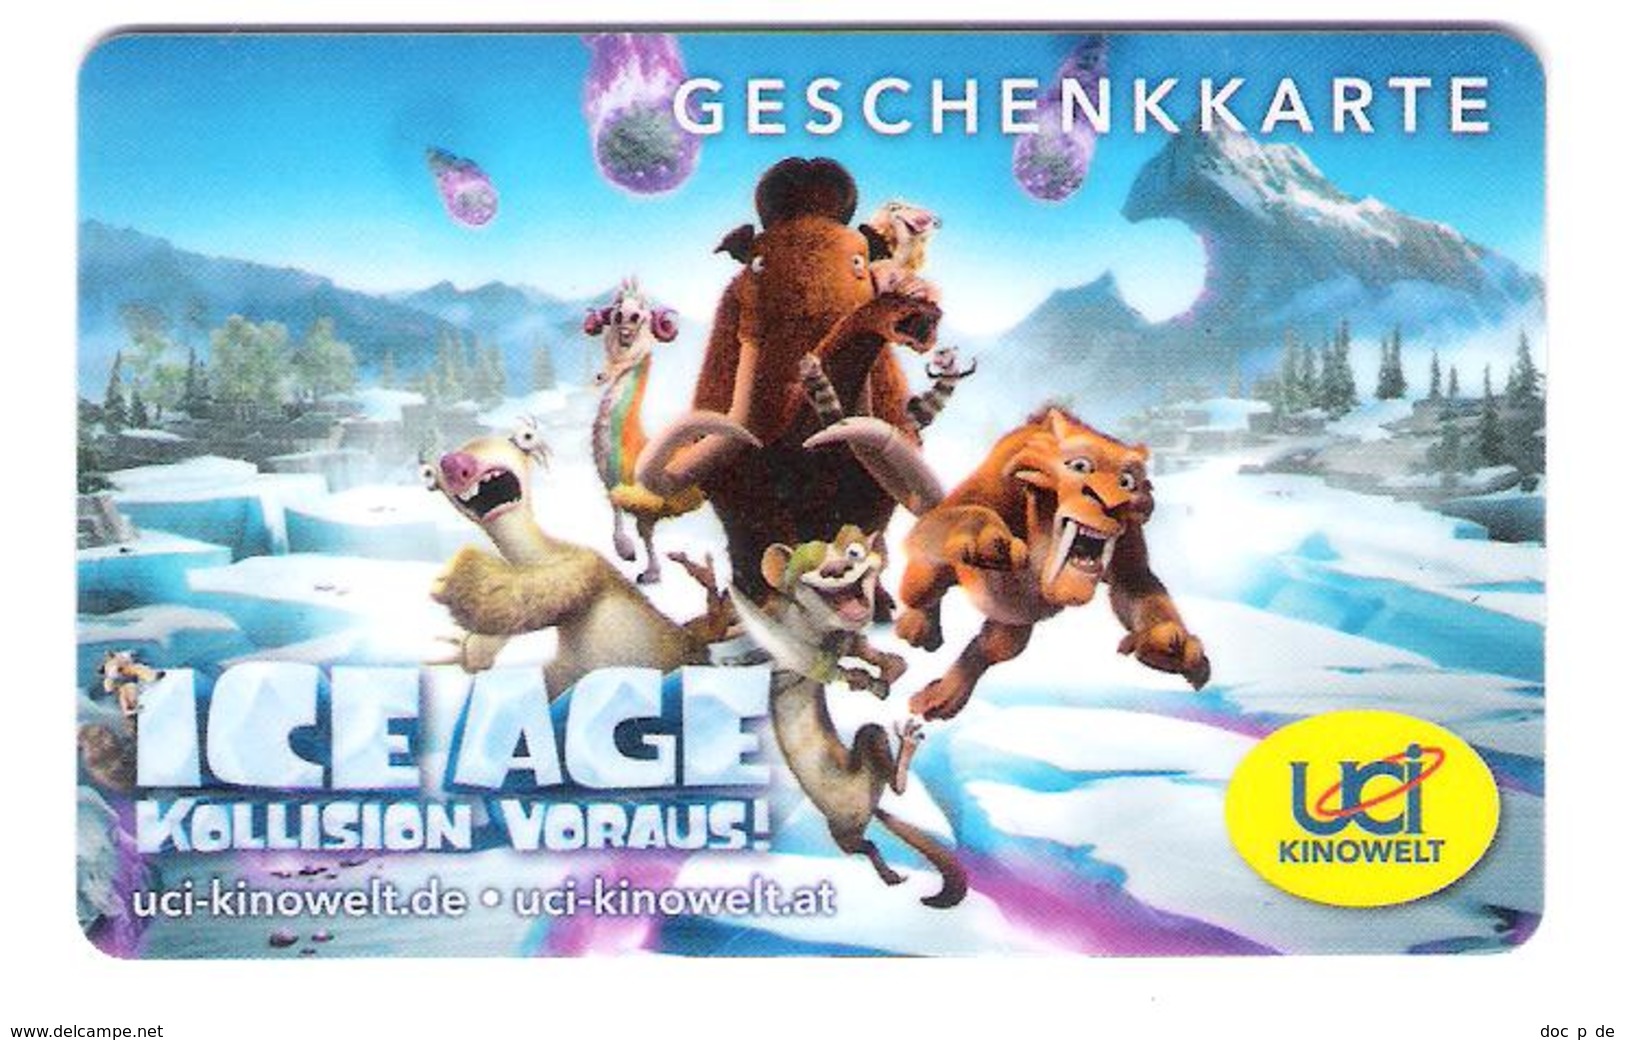 Germany - Allemagne - UCI Kino - Ice Age - Comic - Carte Cadeau - Carta Regalo - Gift Card - Geschenkkarte - Gift Cards